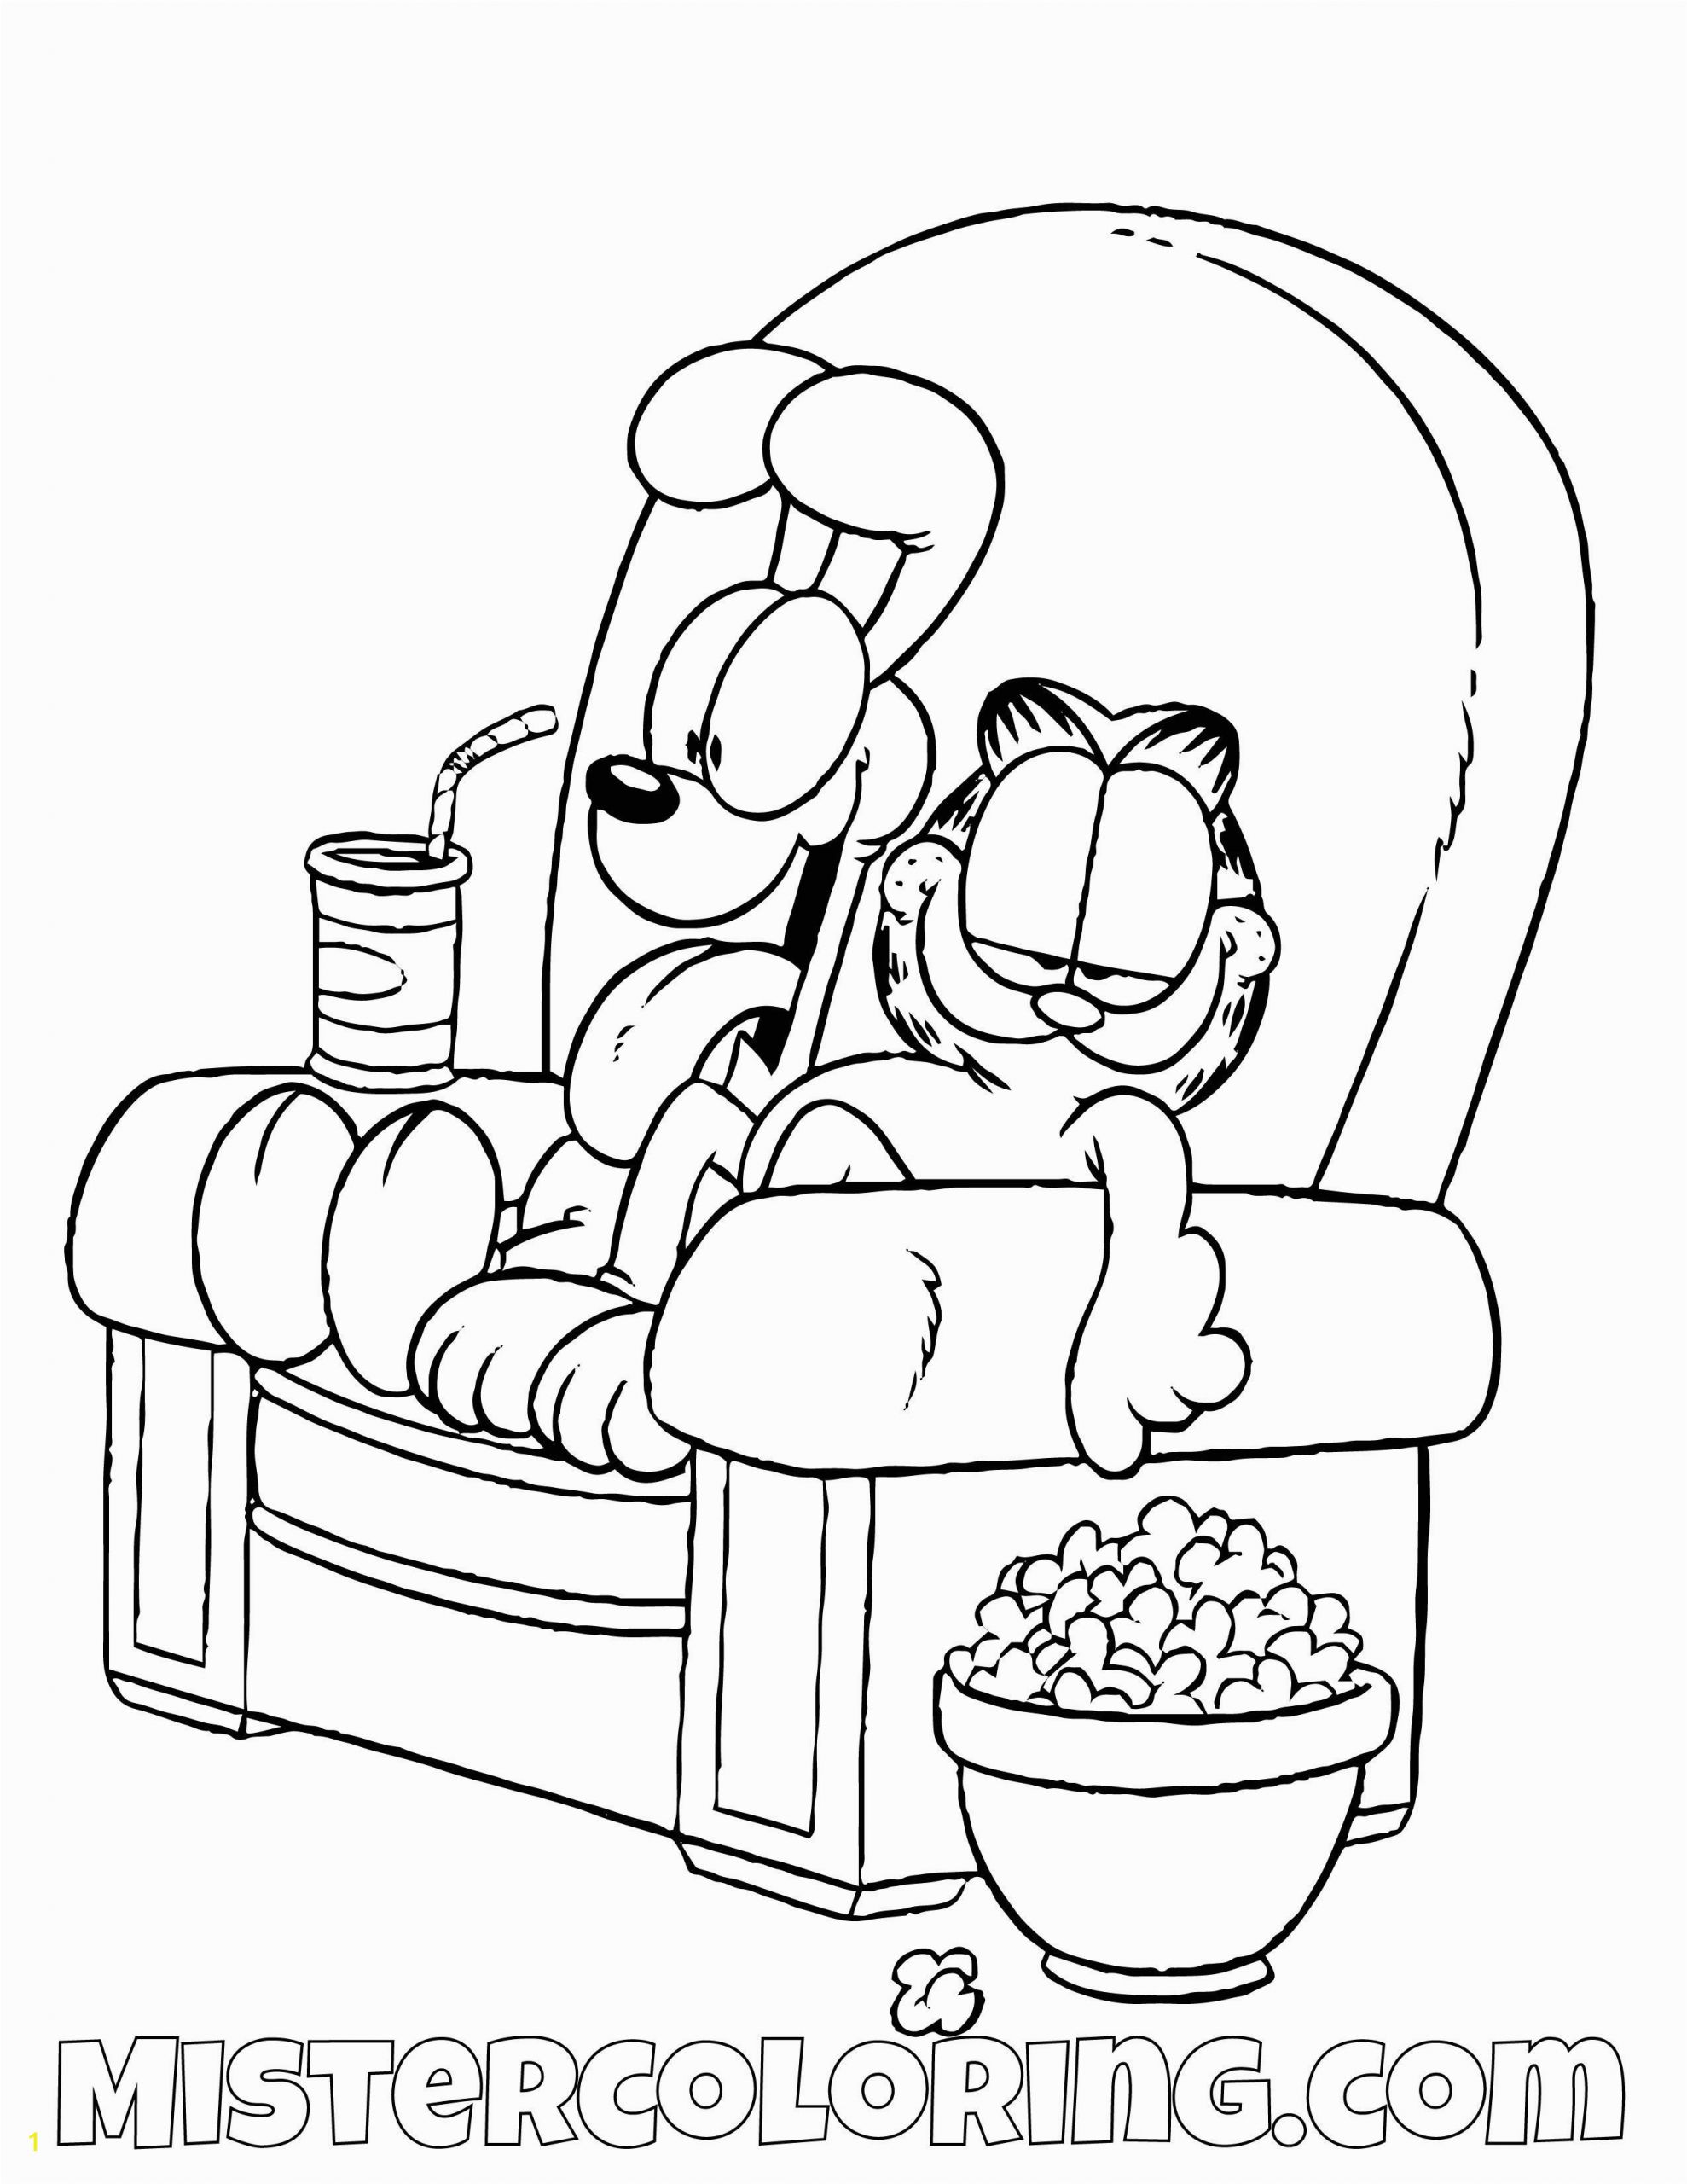 sausage party coloring book fresh pin by mister cijo on garfield coloring pages for kids of sausage party coloring book